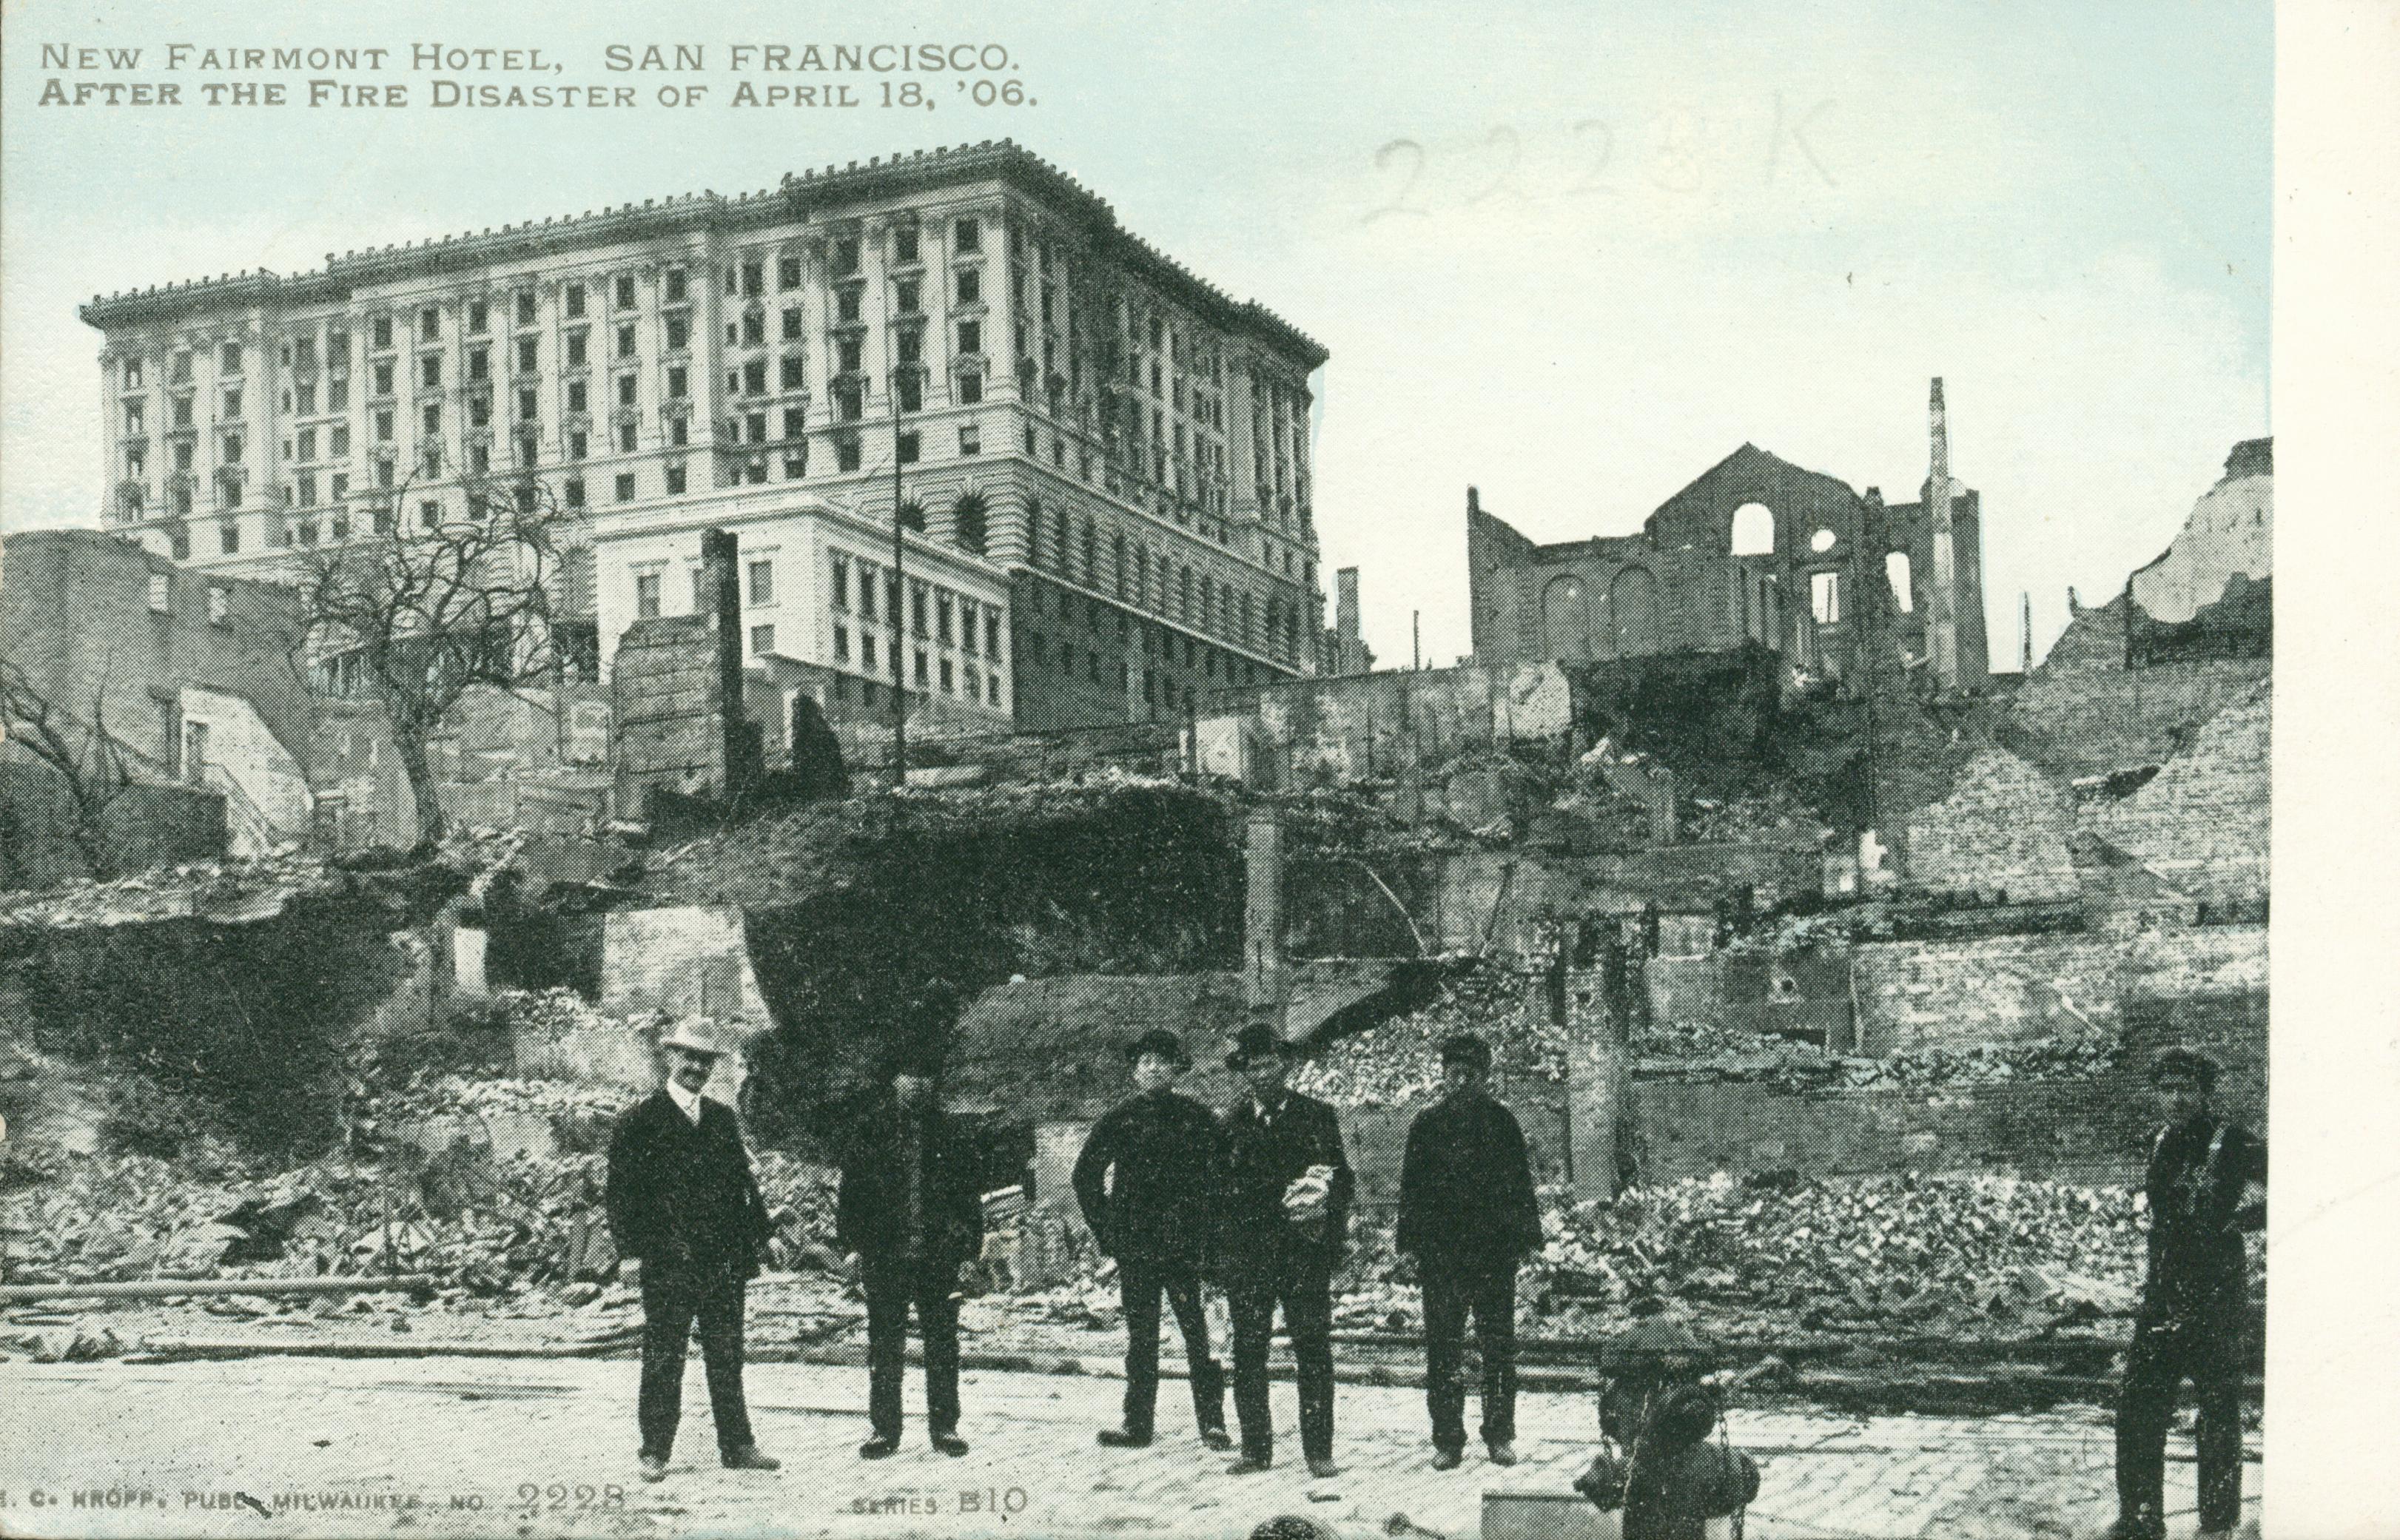 Shows the New Fairmont Hotel surrounded by rubble in San Francisco